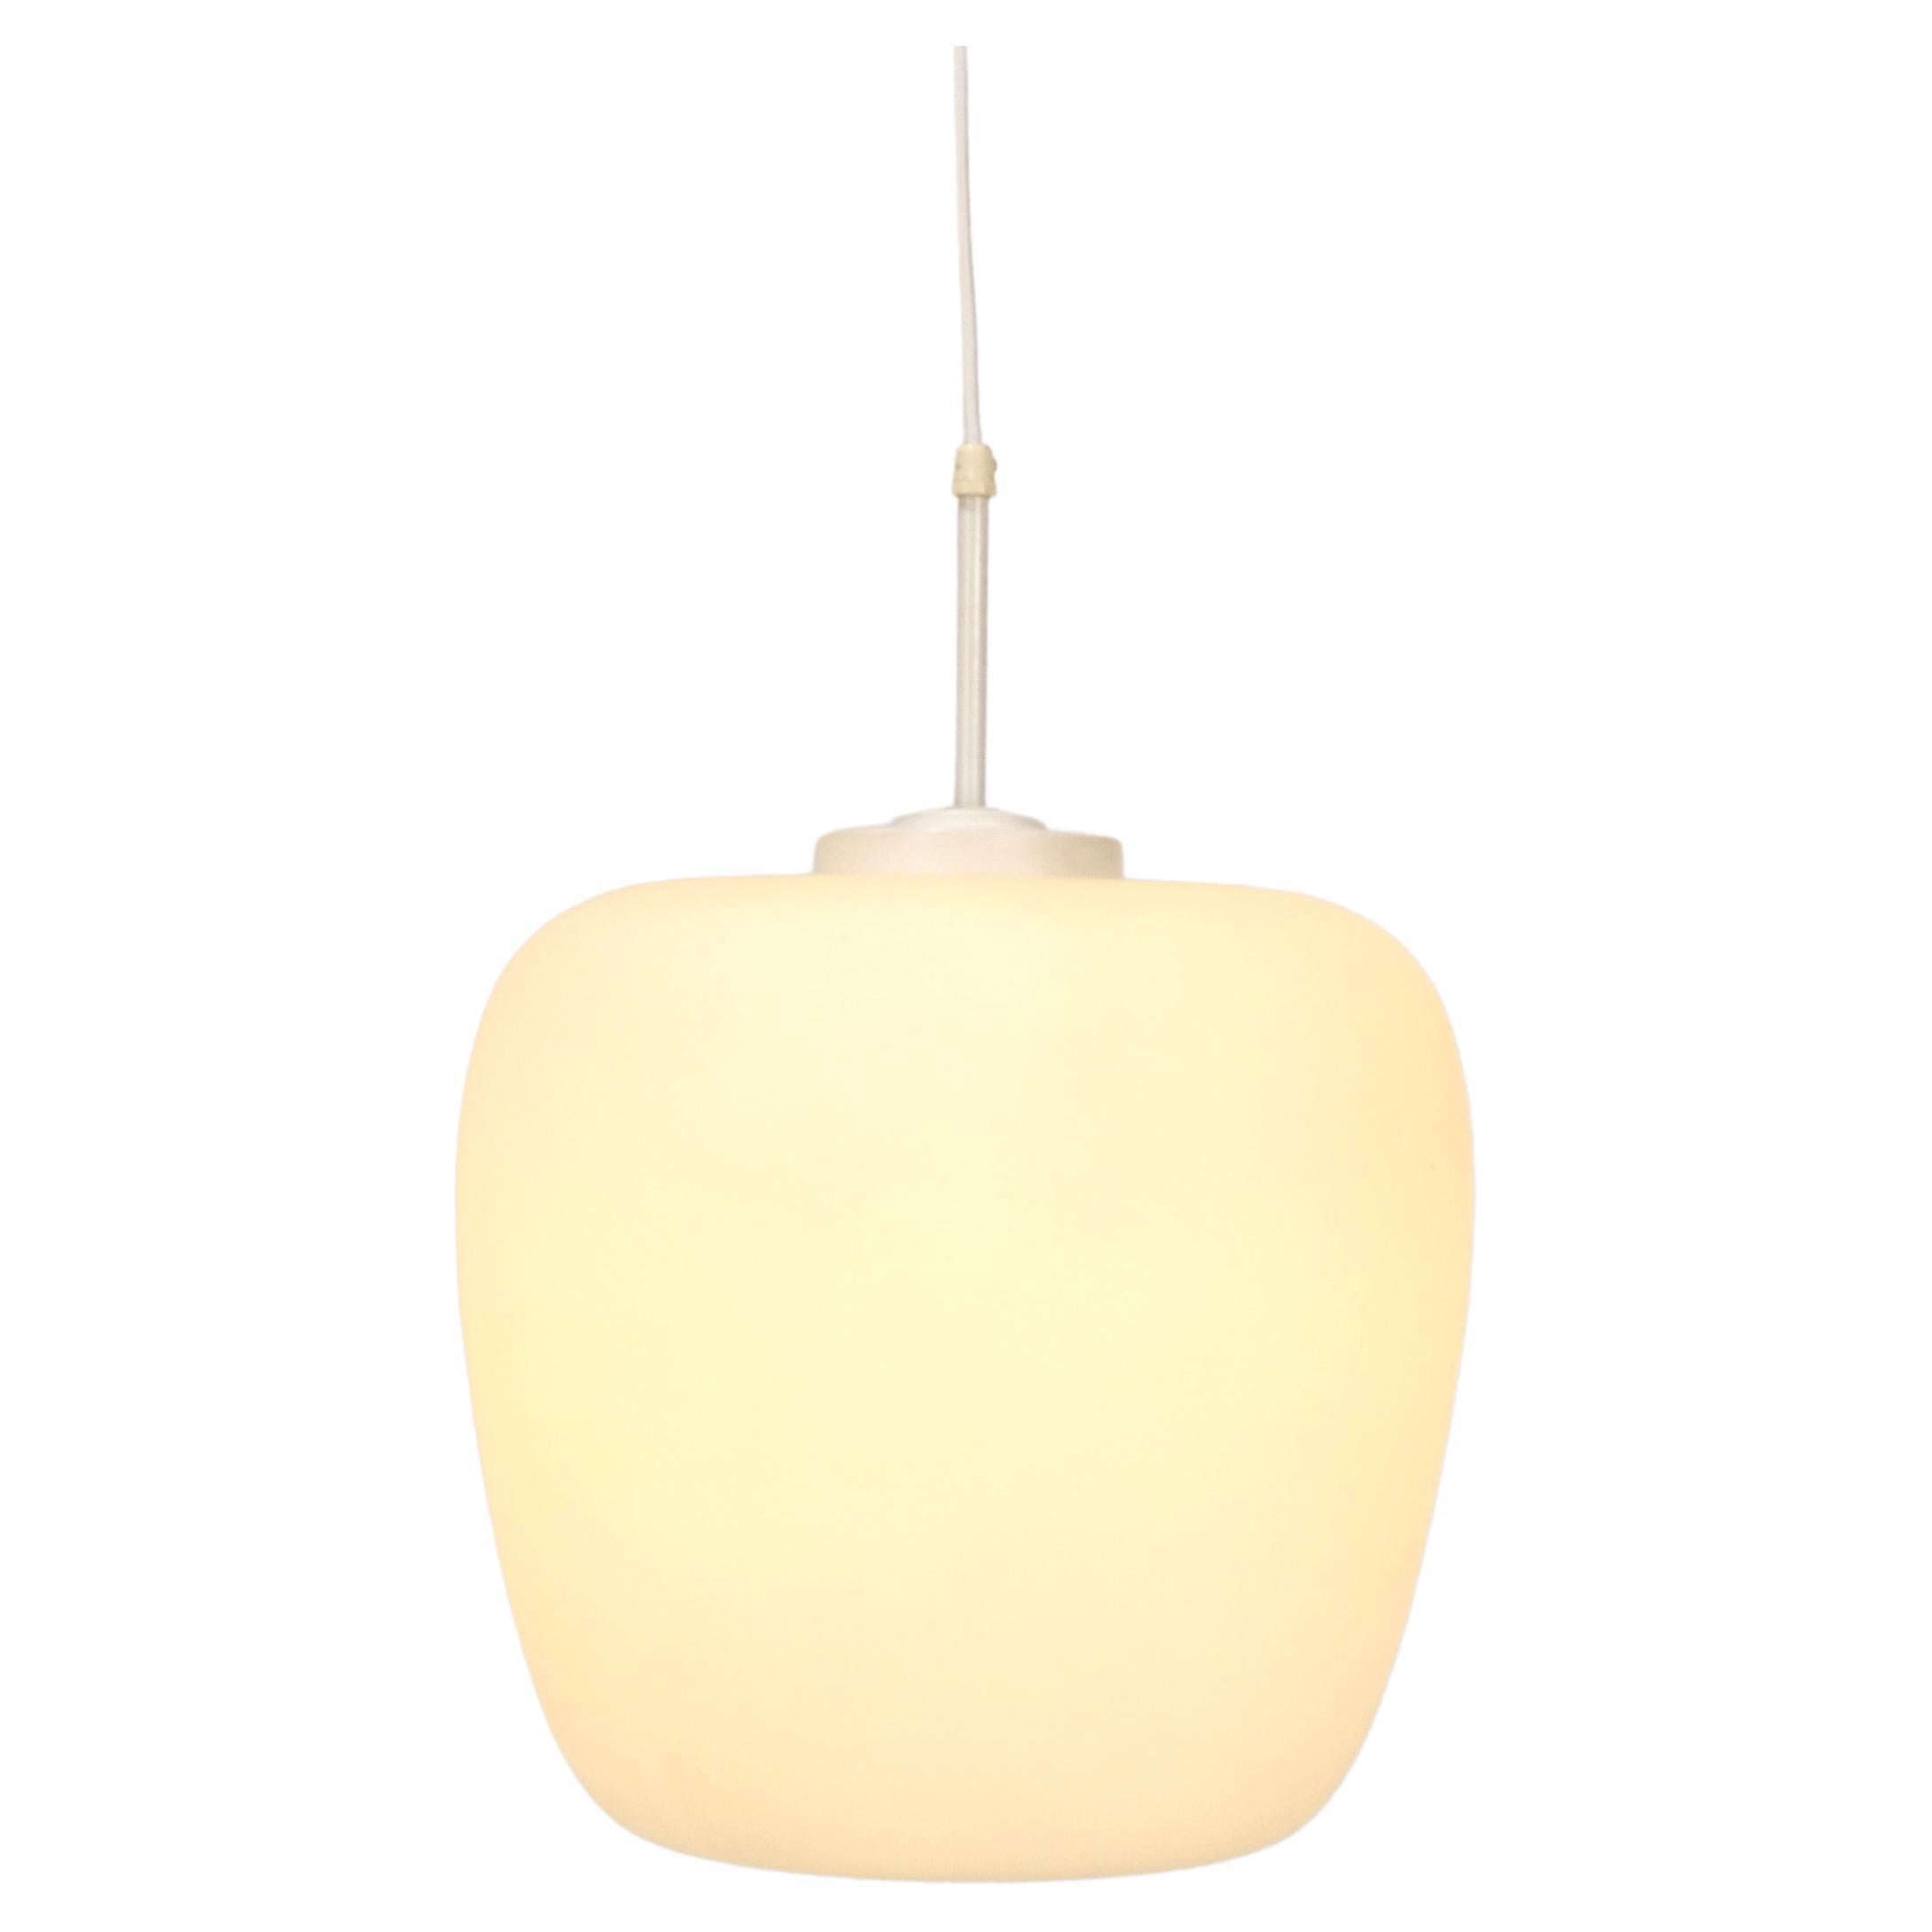 Great pendant lamp in the style of " Kina Lamp" by Bent Karlby For Sale